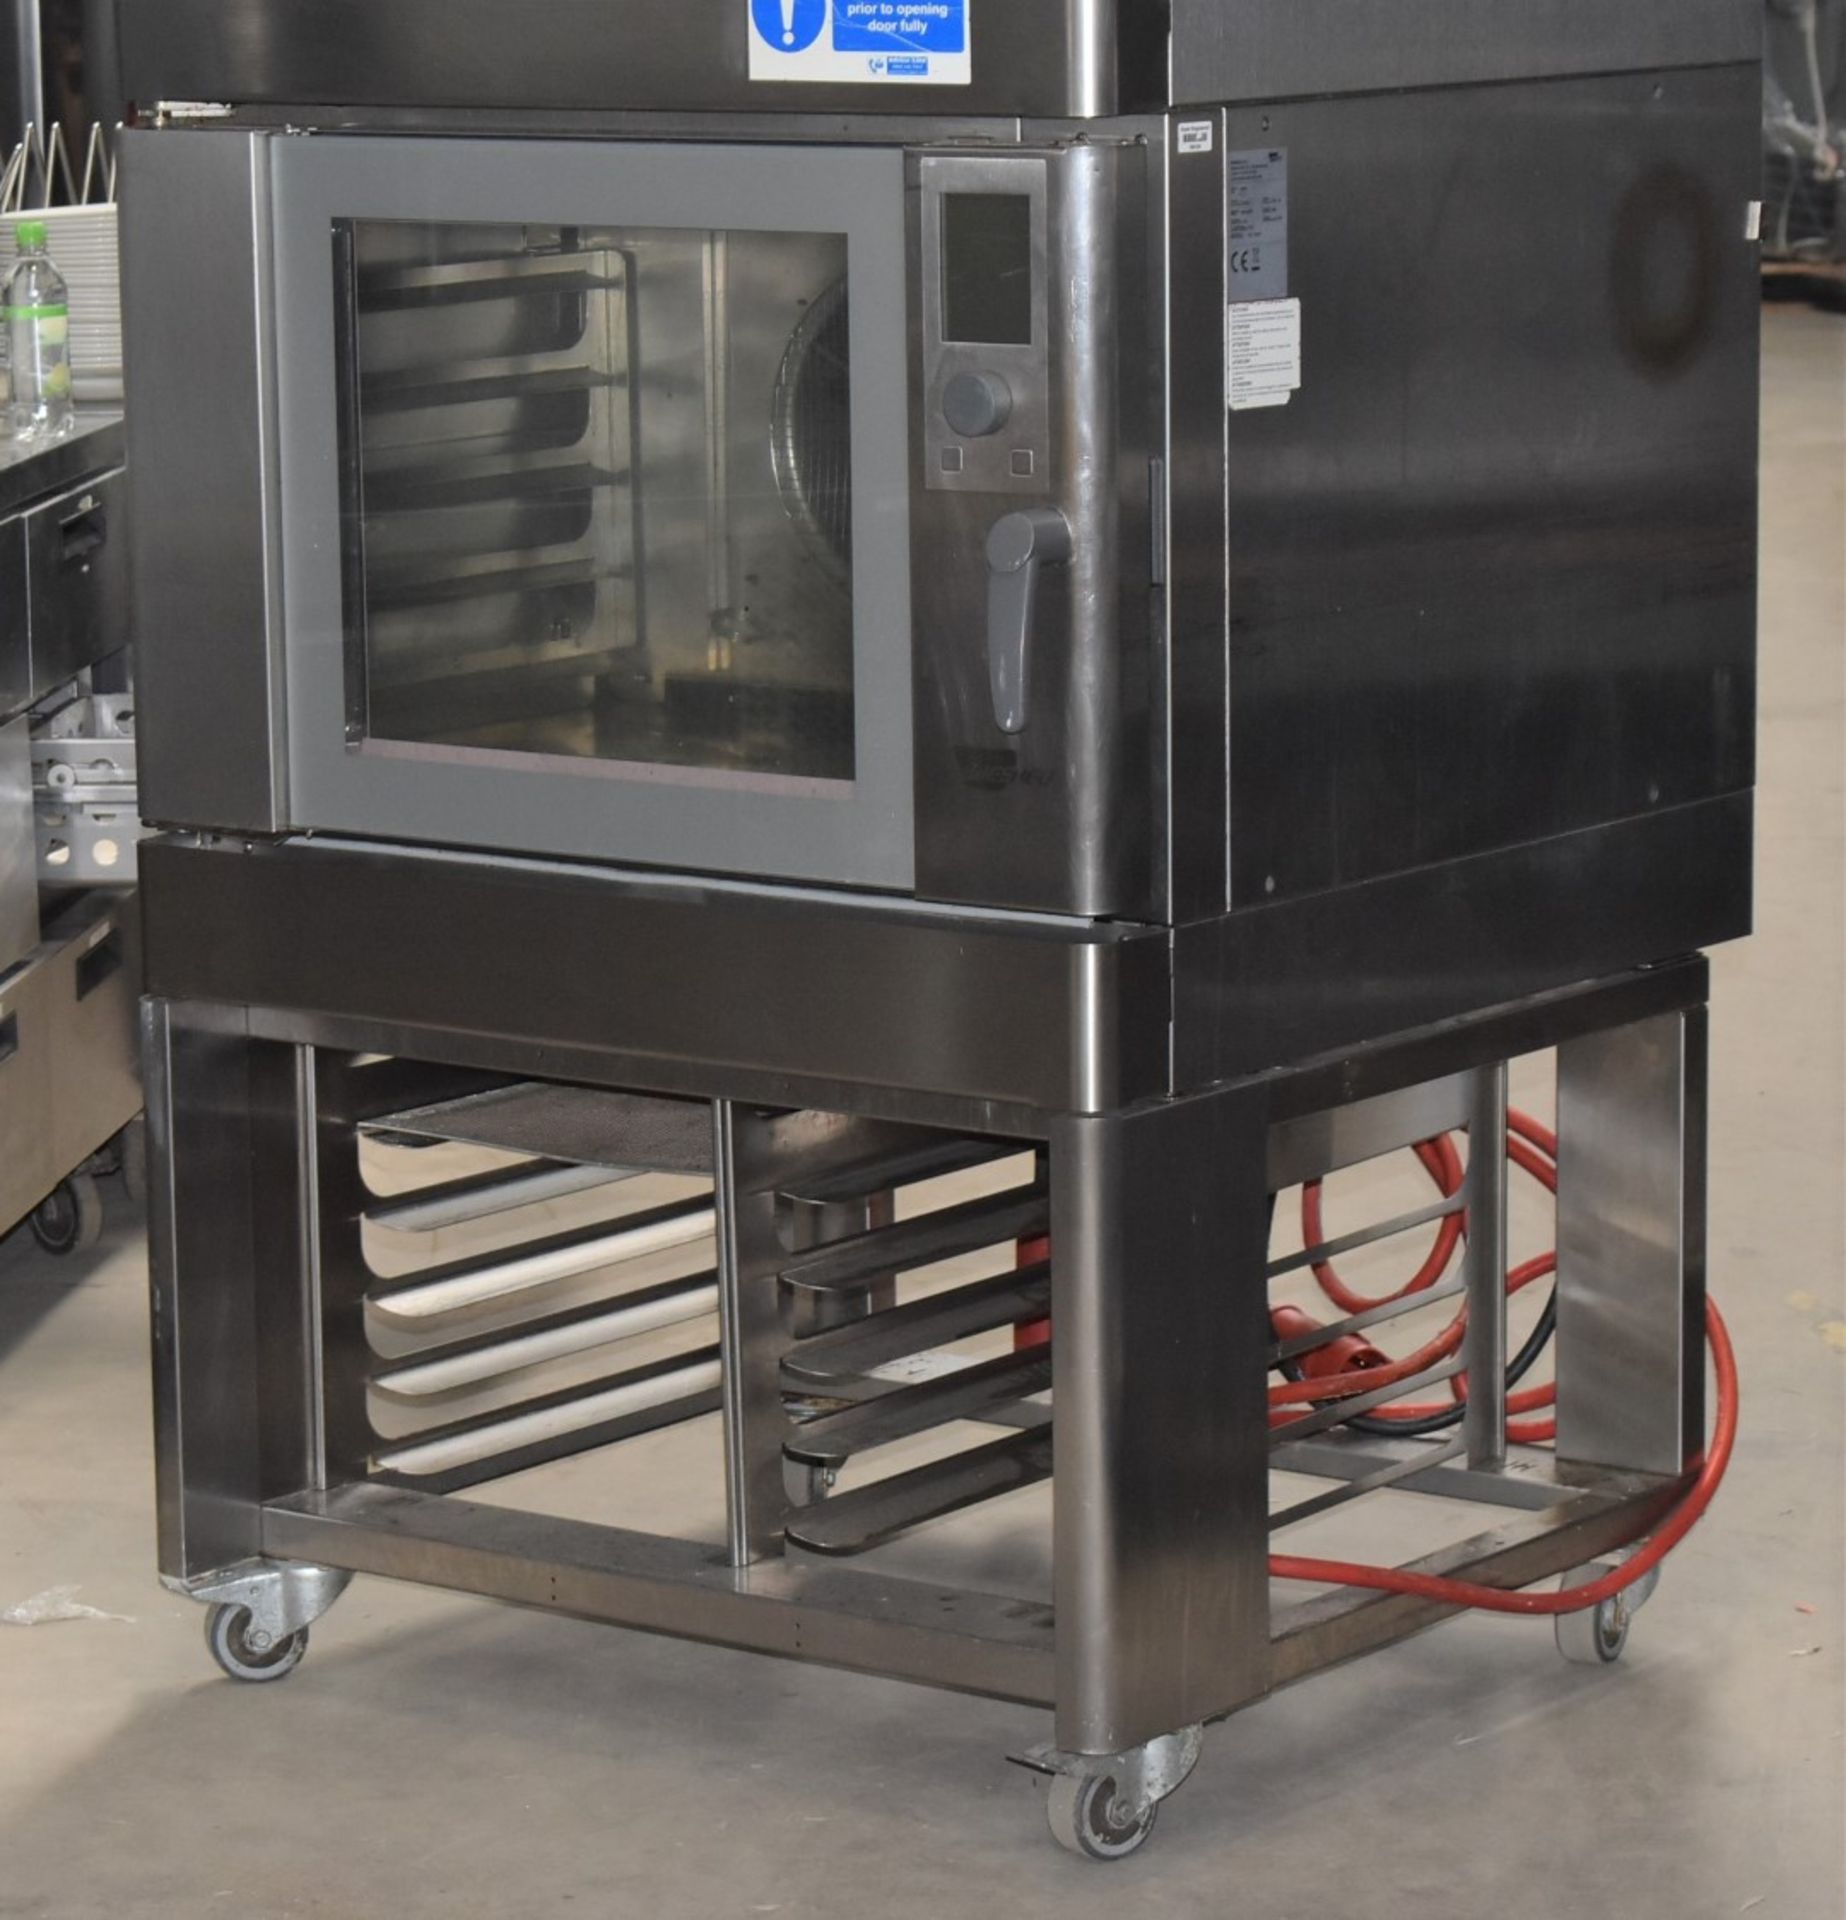 1 x Wiesheu B4-E2 Duo Commercial Convection Oven With Stainless Steel Exterior - Image 10 of 12